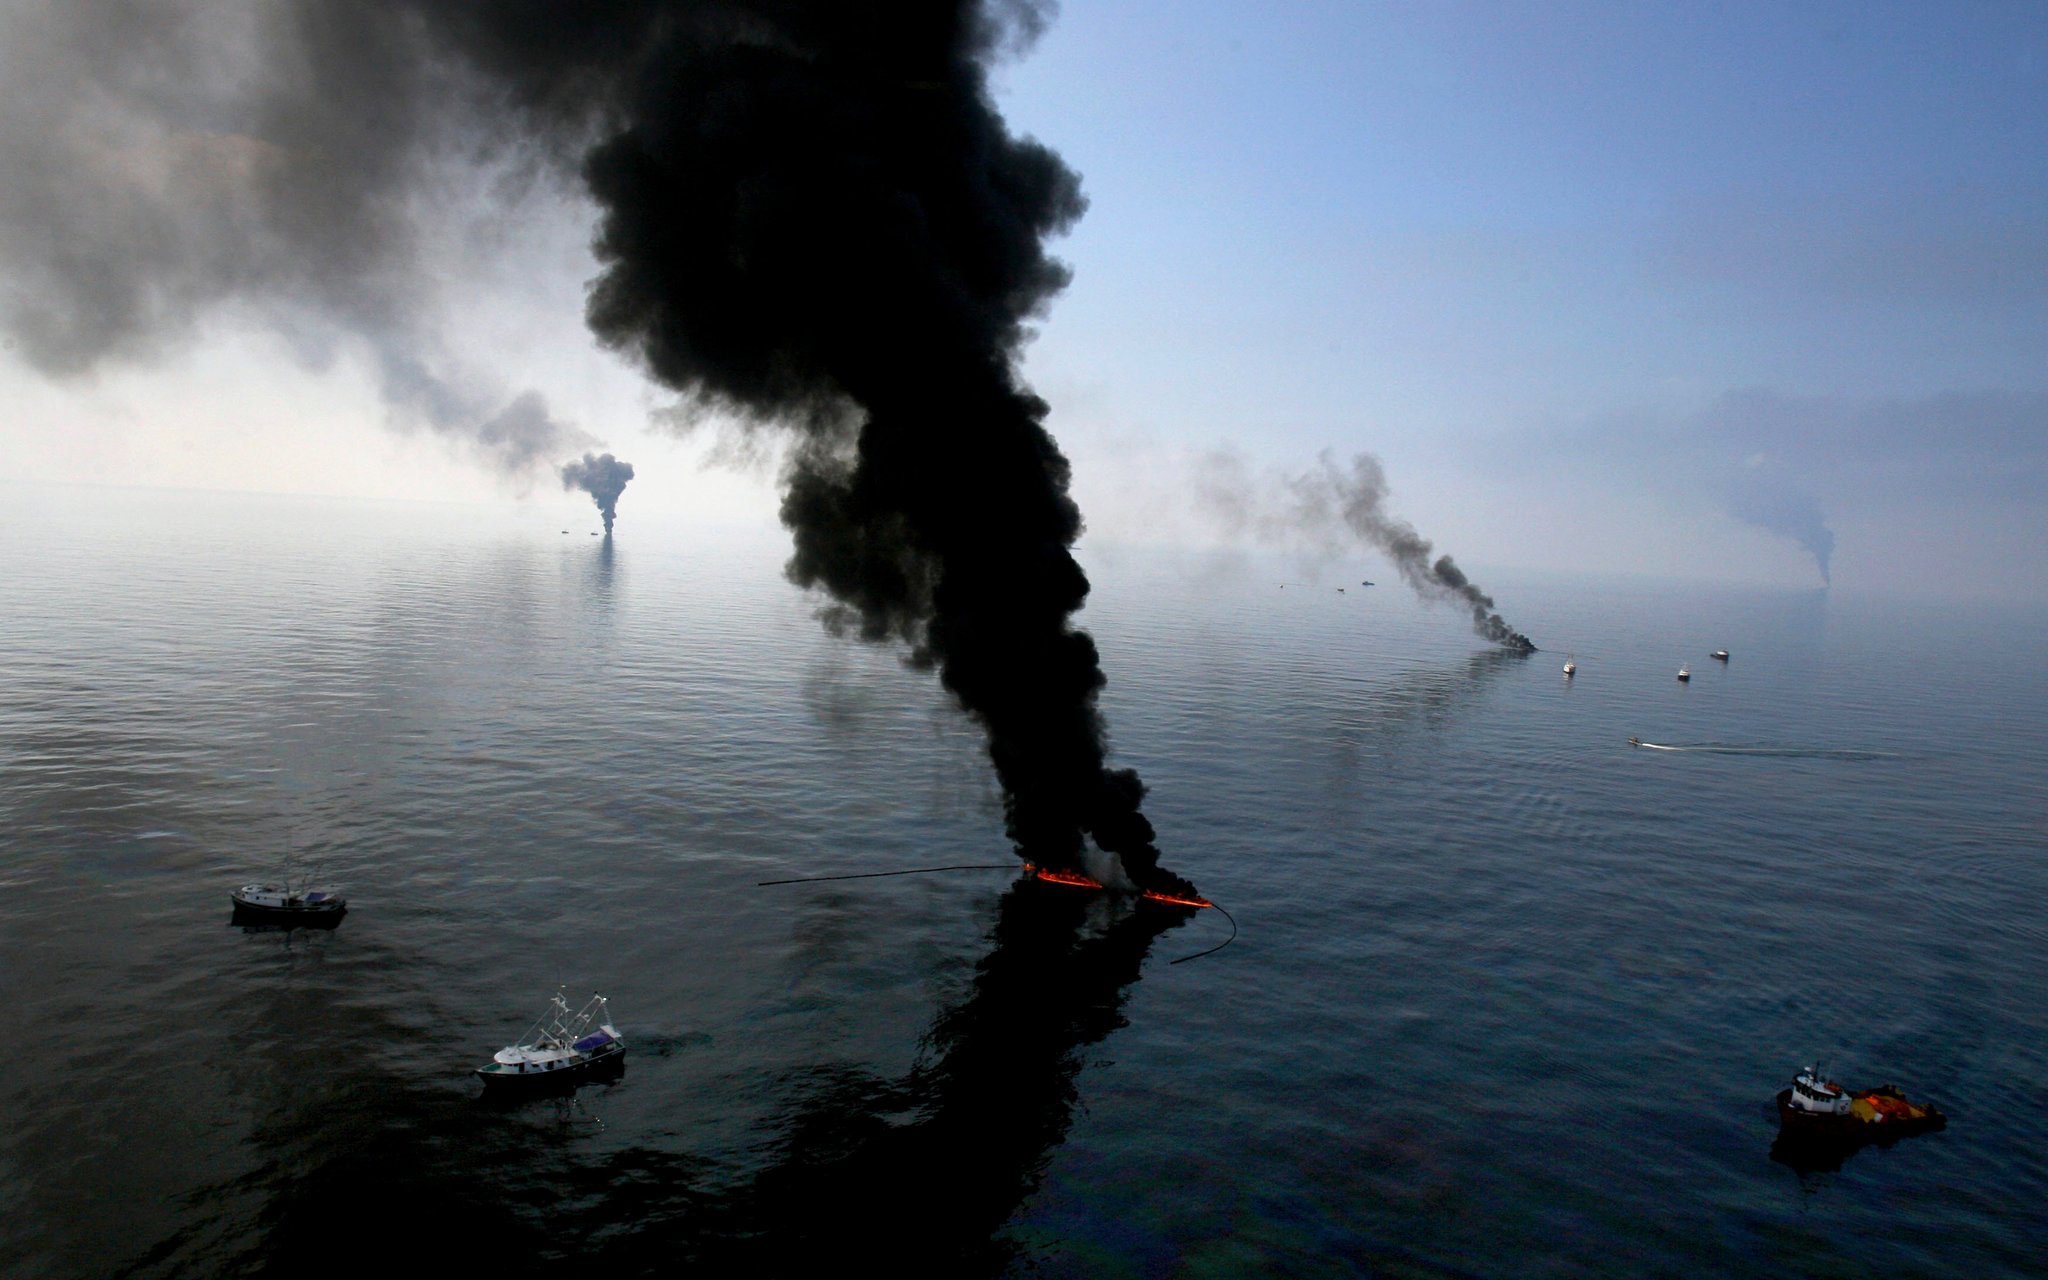 BP to Take $1.7 Billion Charge Over Deepwater Horizon Spill